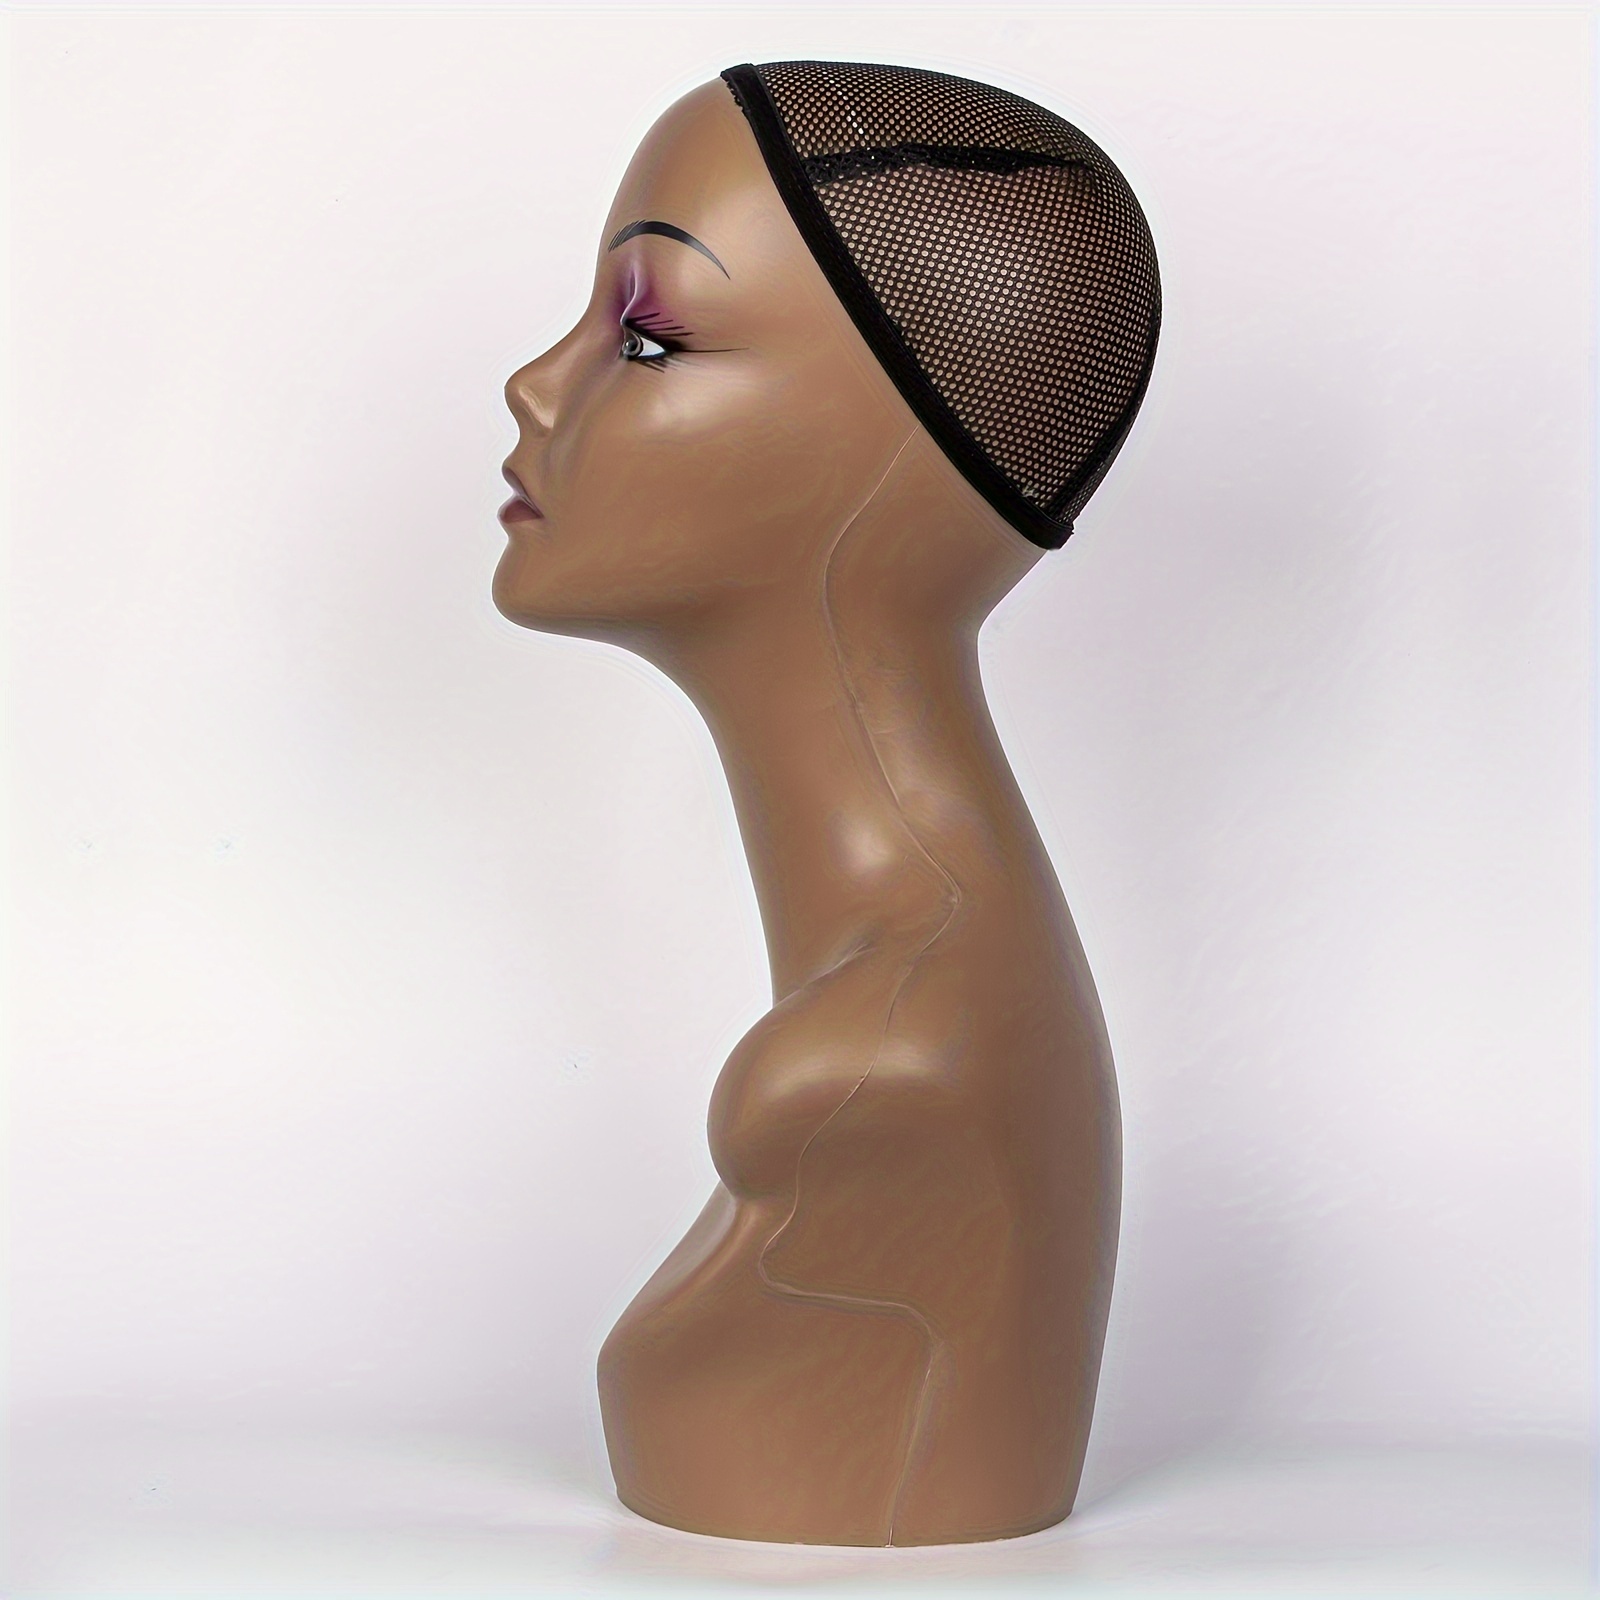 Mannequin Head Form –